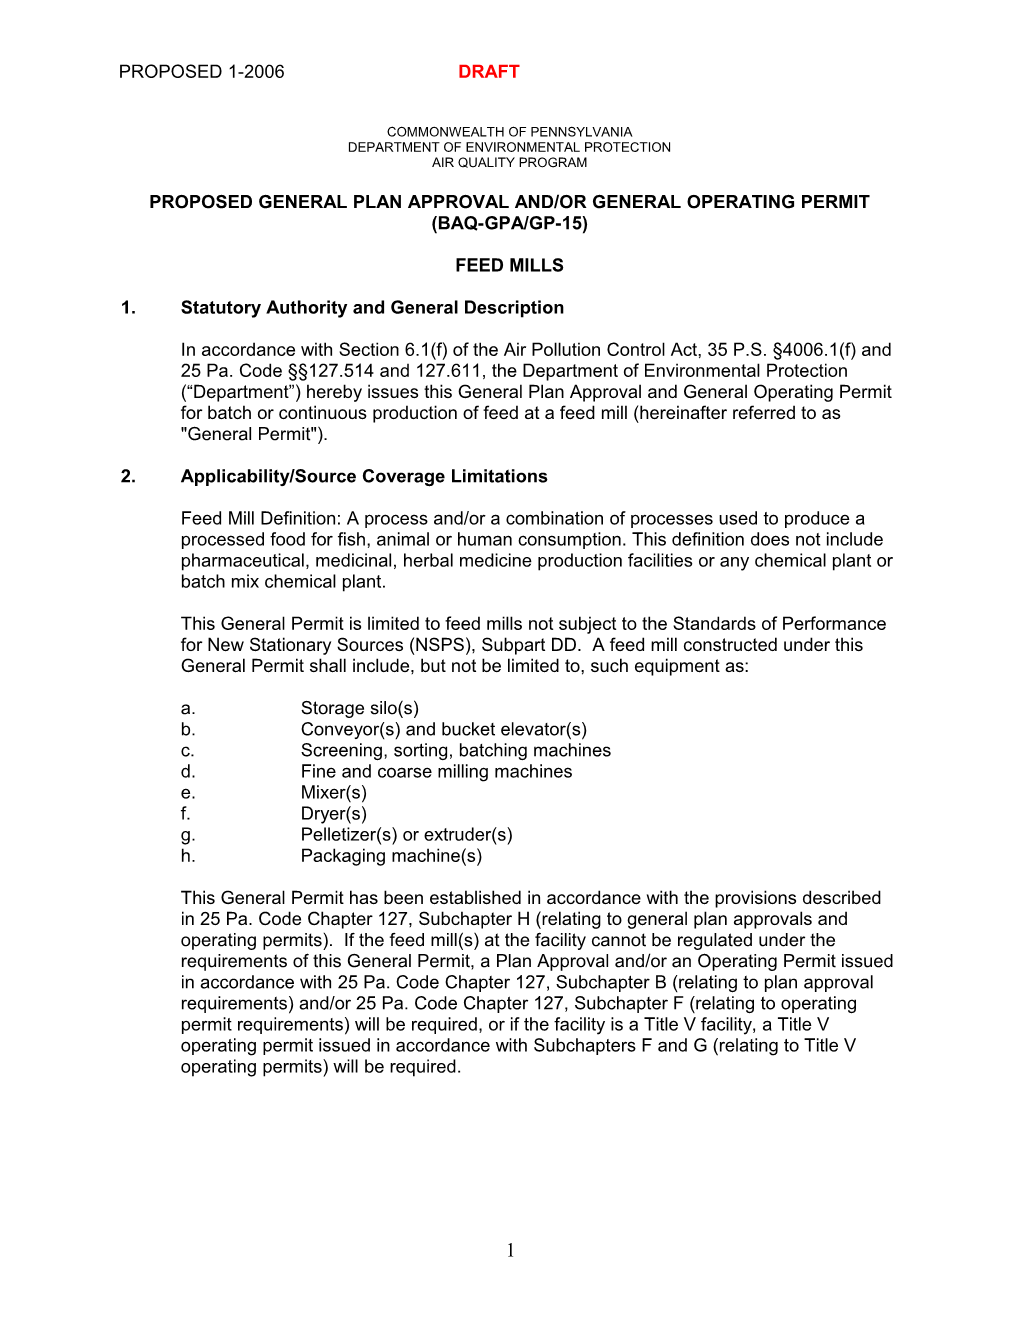 Proposed General Plan Approval And/Or General Operating Permit